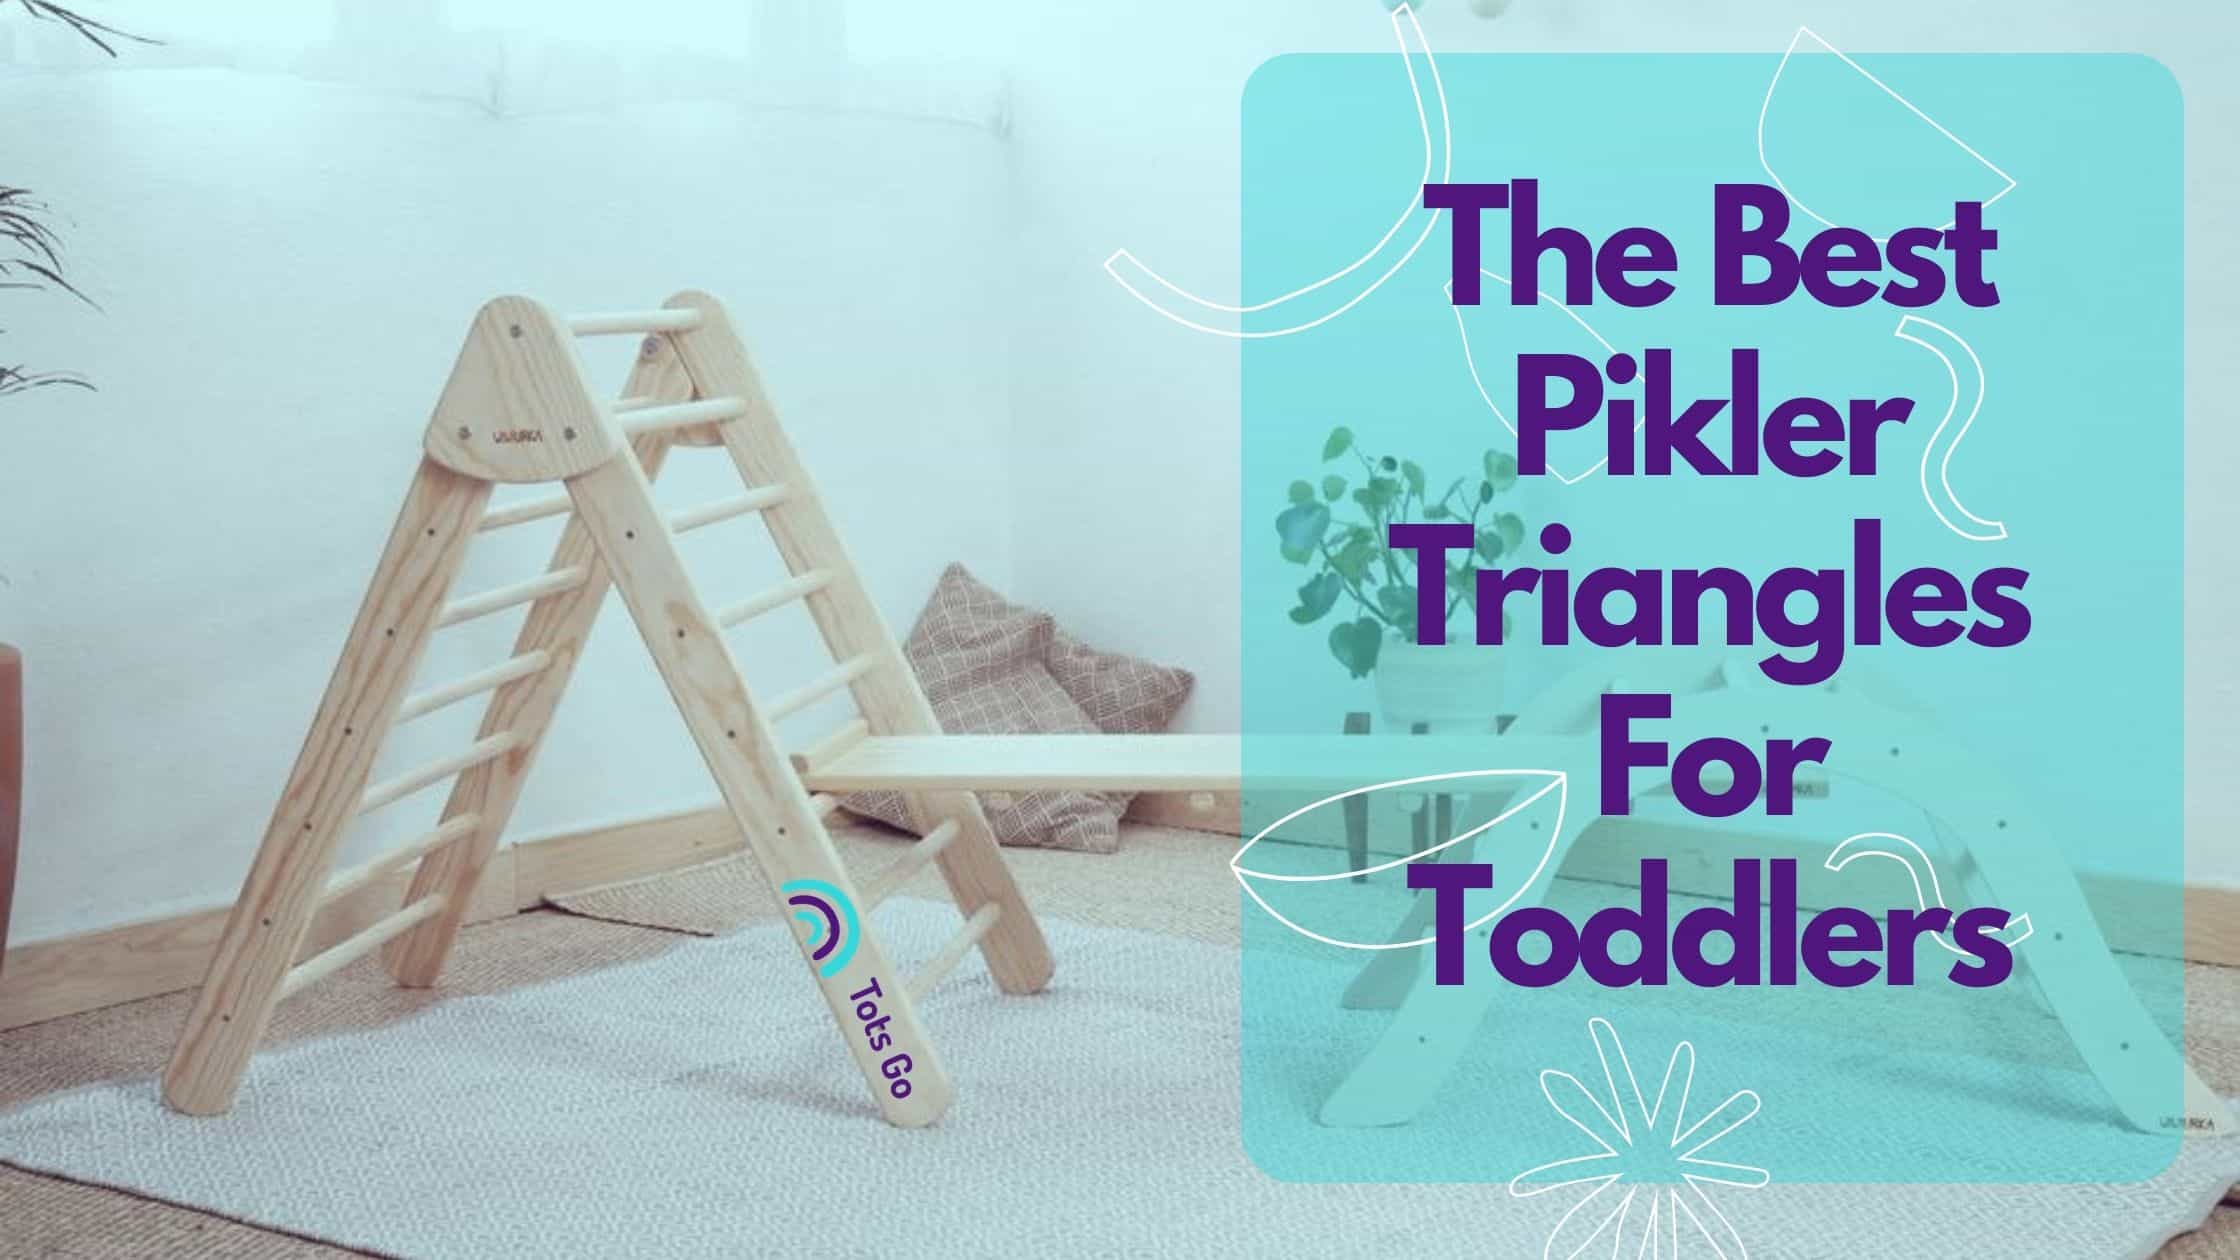 the best pikler triangle for toddlers